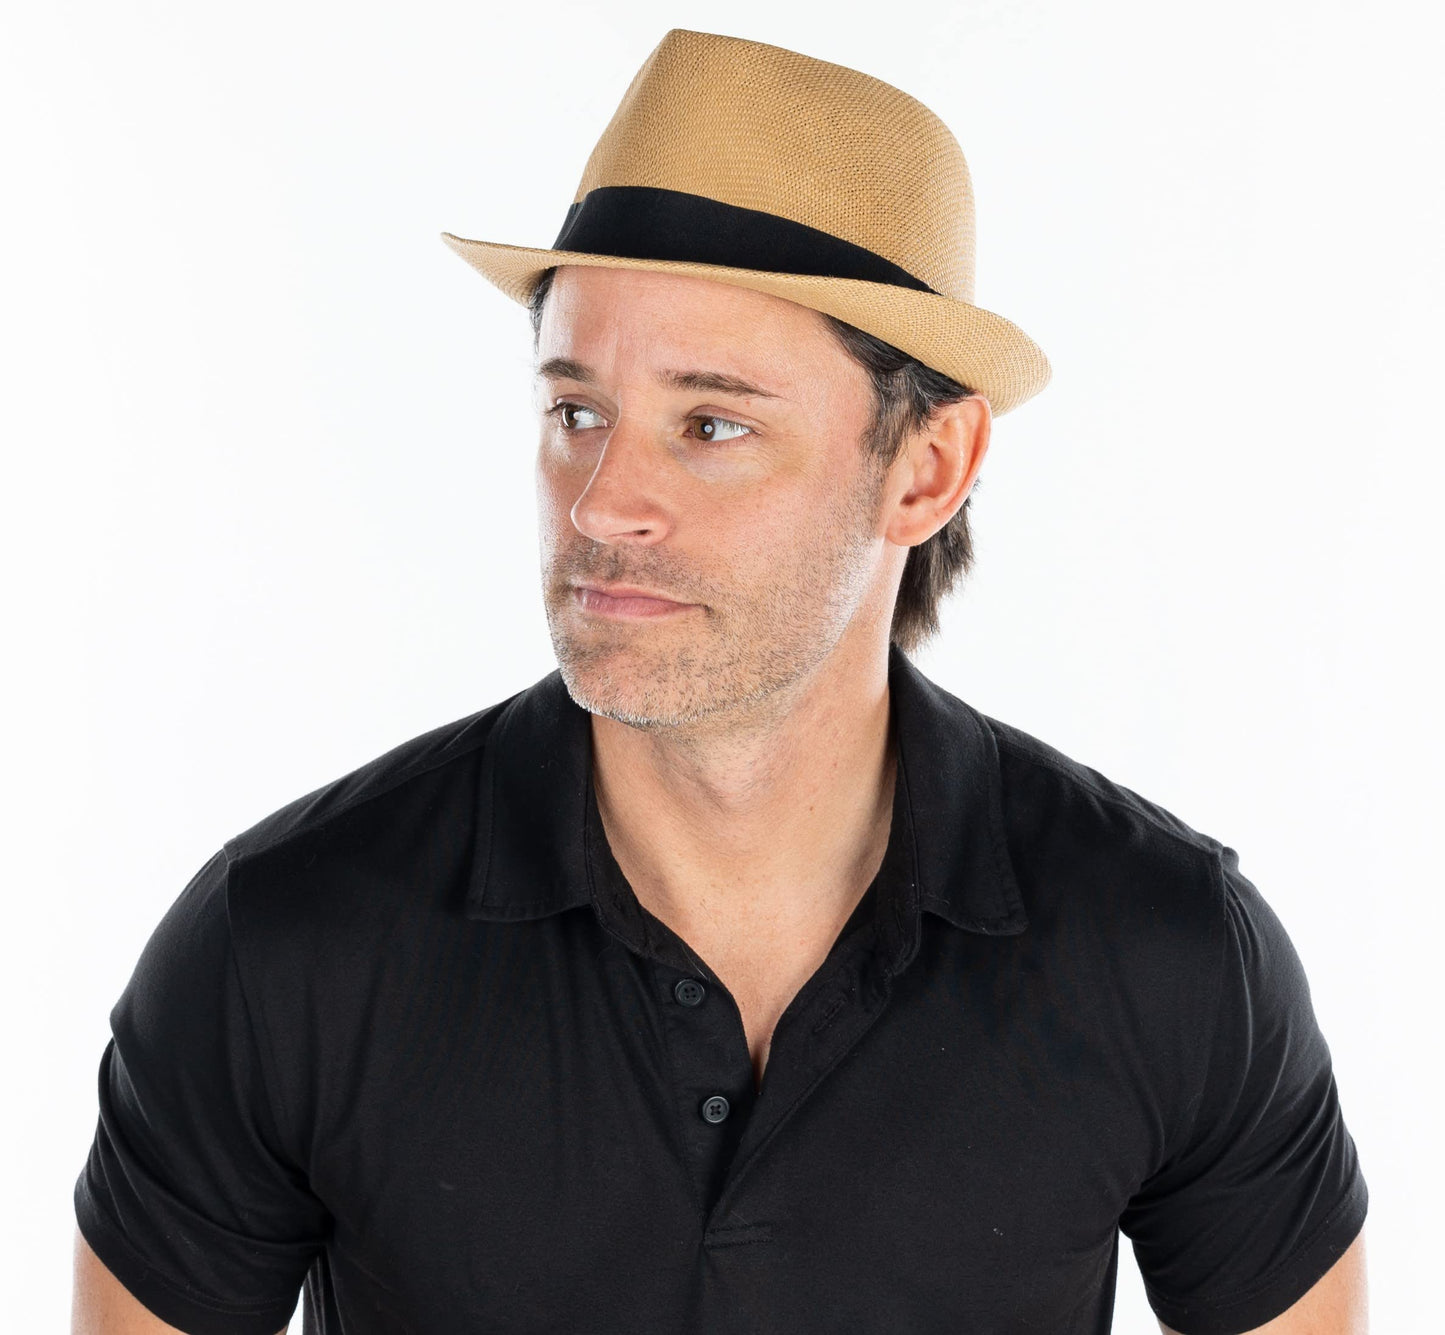 Straw Fedora Hats for Men by Funky Junque